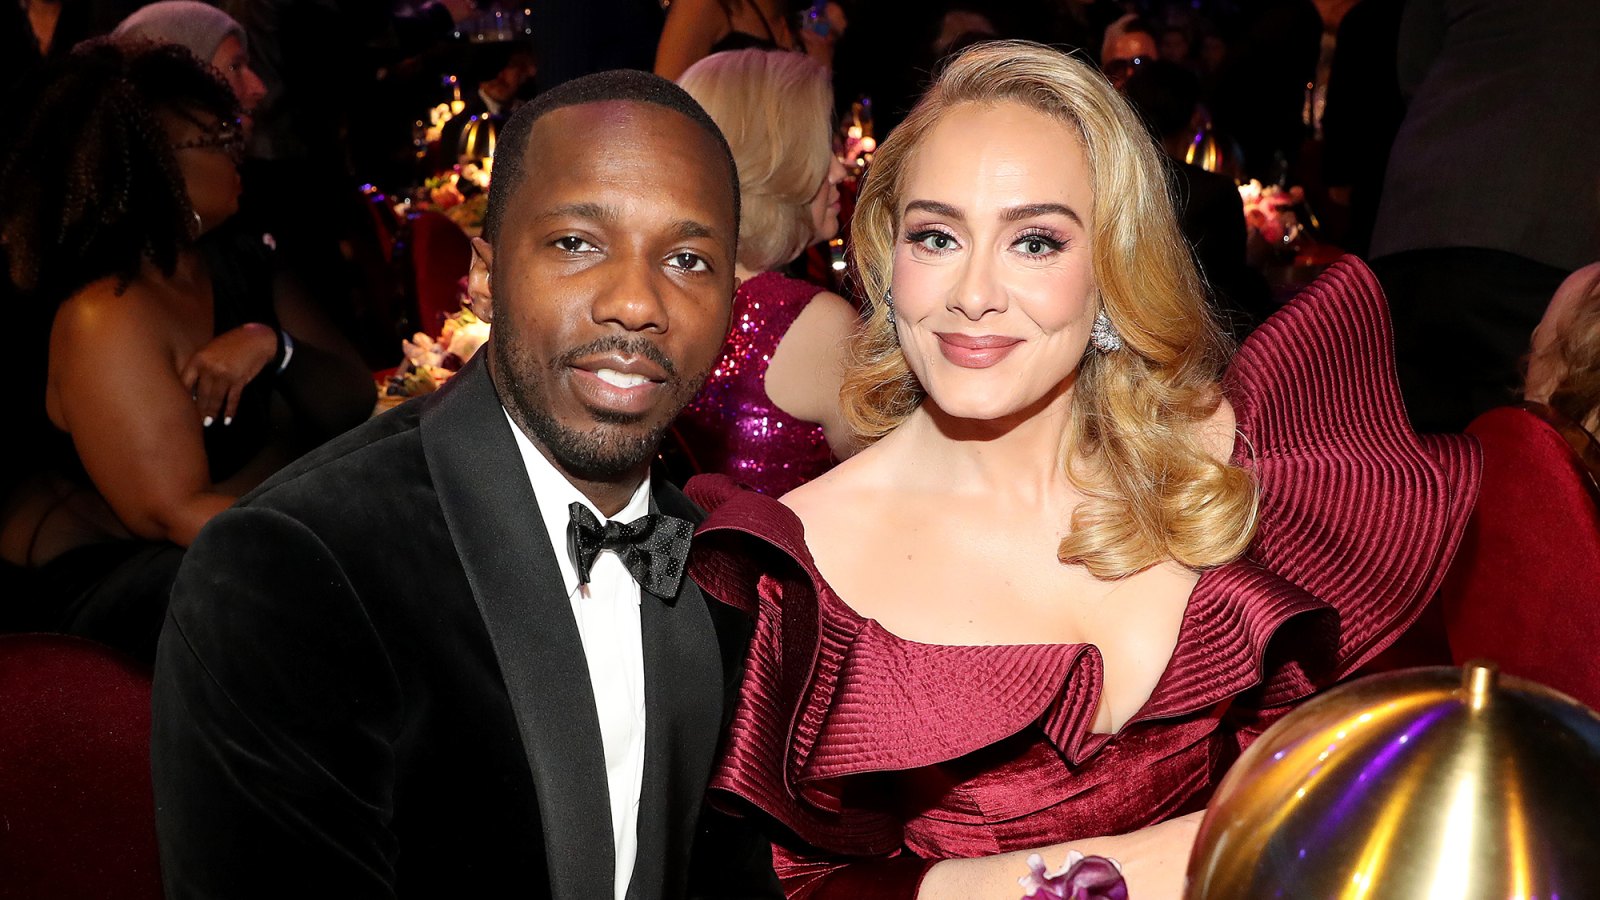 Adele Refers to Rich Paul as Her 'Husband' During Las Vegas Concert, Sparks Marriage Speculation